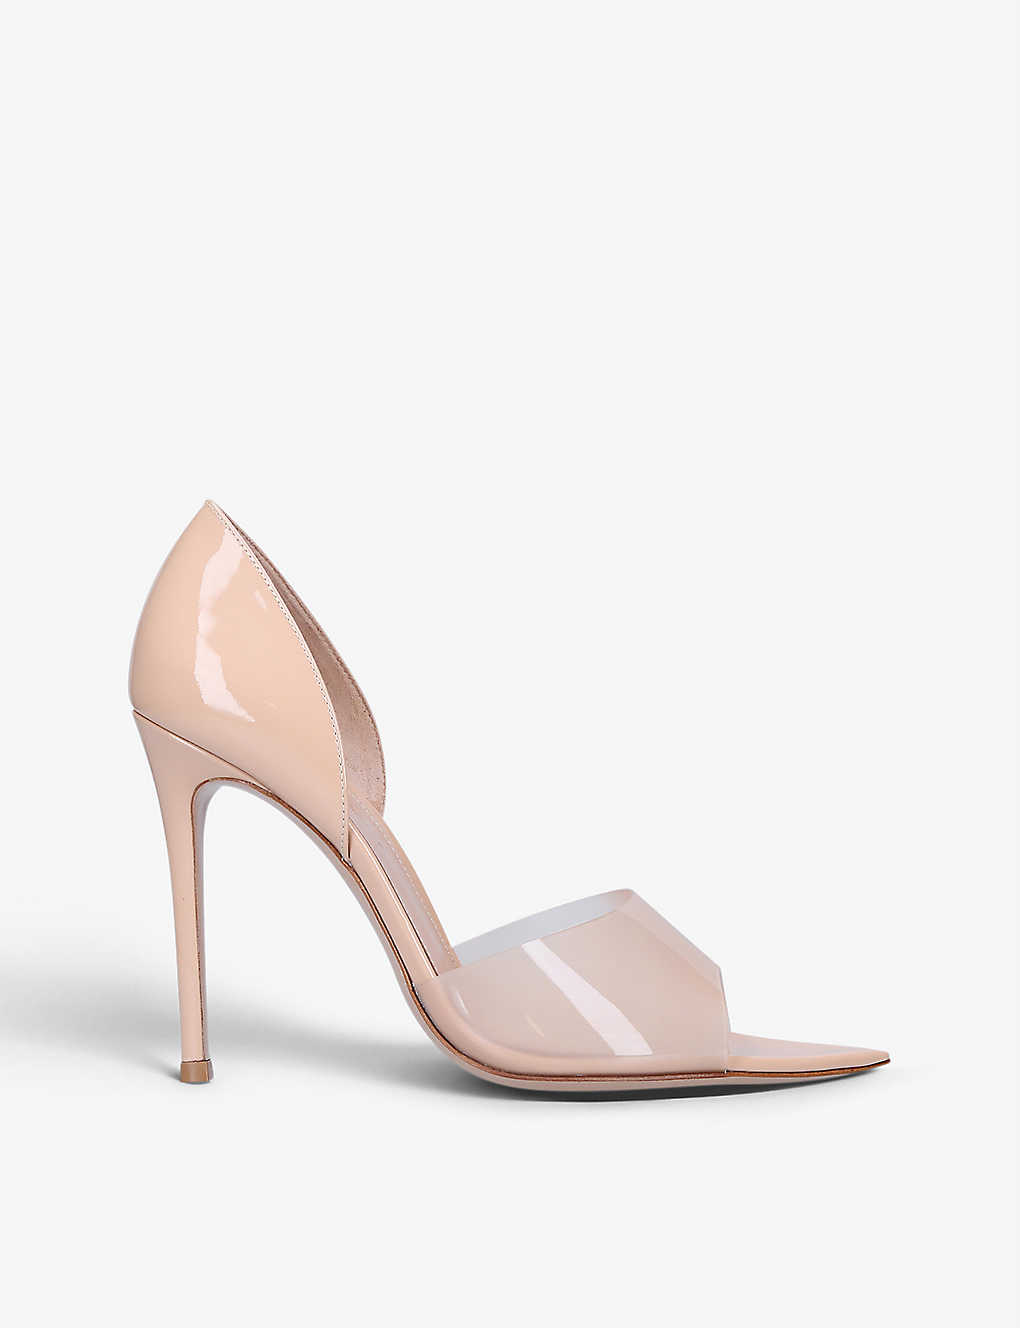 Gianvito Rossi Womens Blush Bree D'orsay Leather And Pvc Heeled Sandals